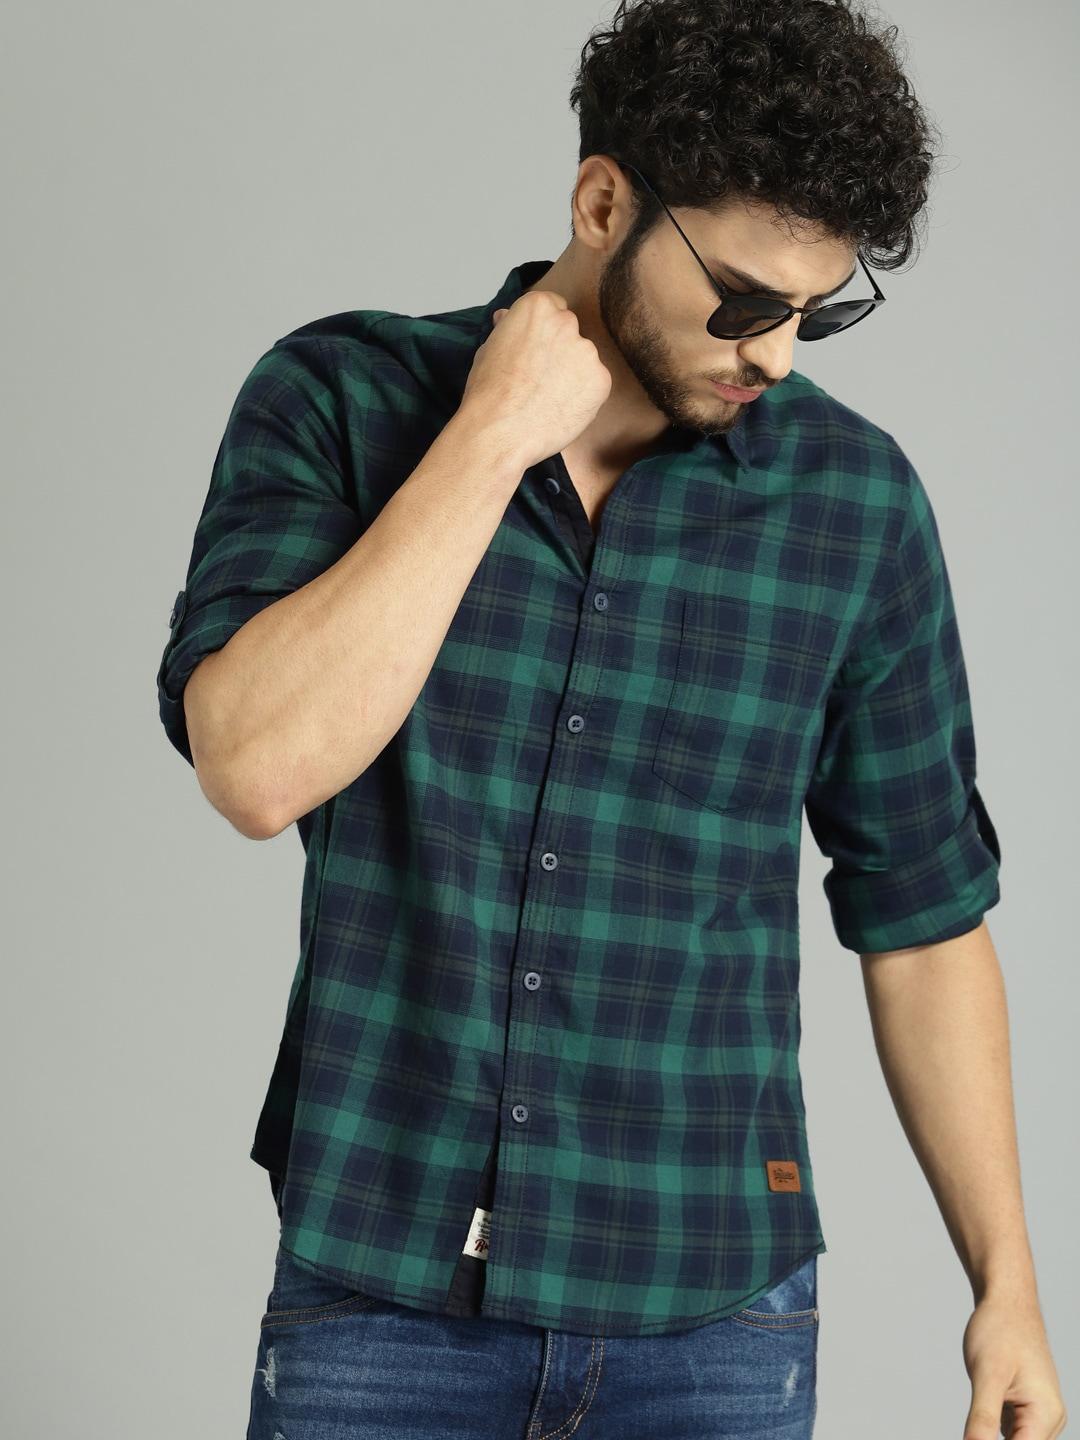 roadster-men-green-&-navy-blue-checked-casual-sustainable-shirt